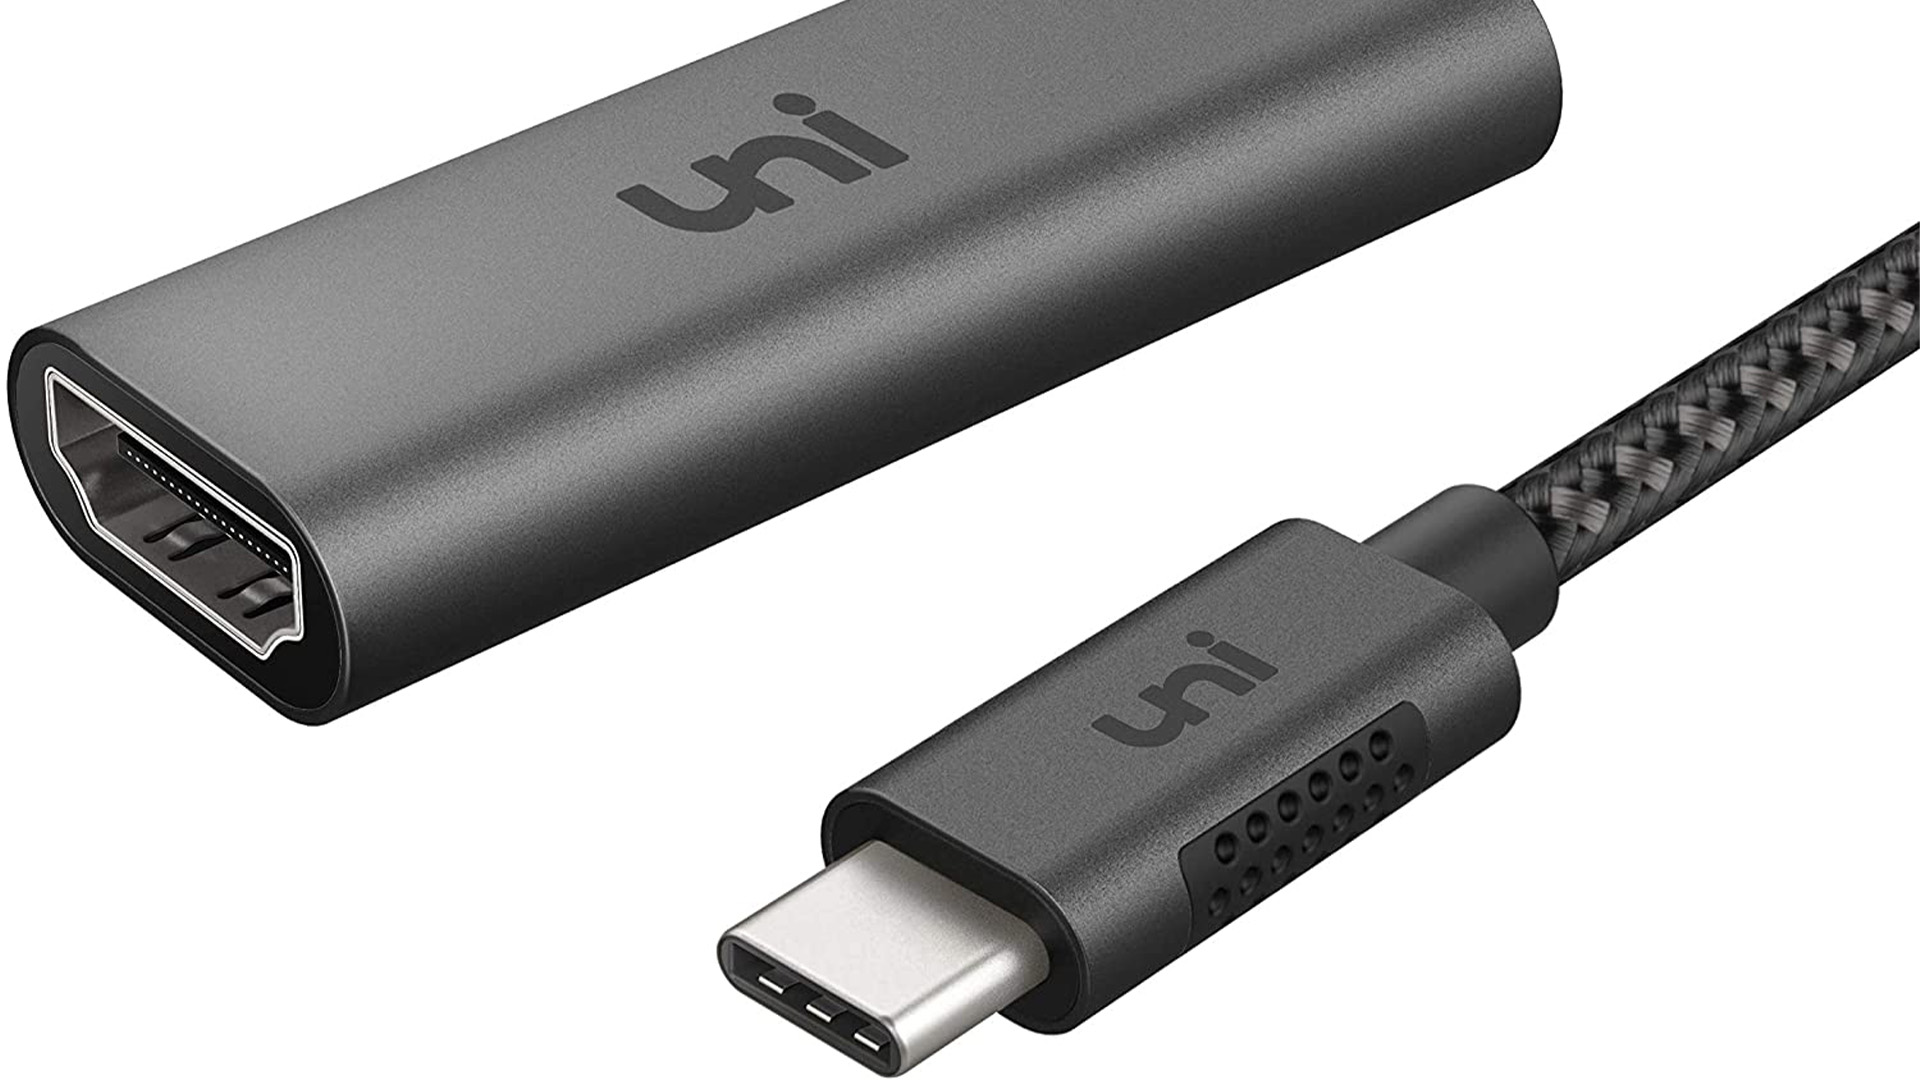 A stock photo of the Uni HDMI to USB C adapter